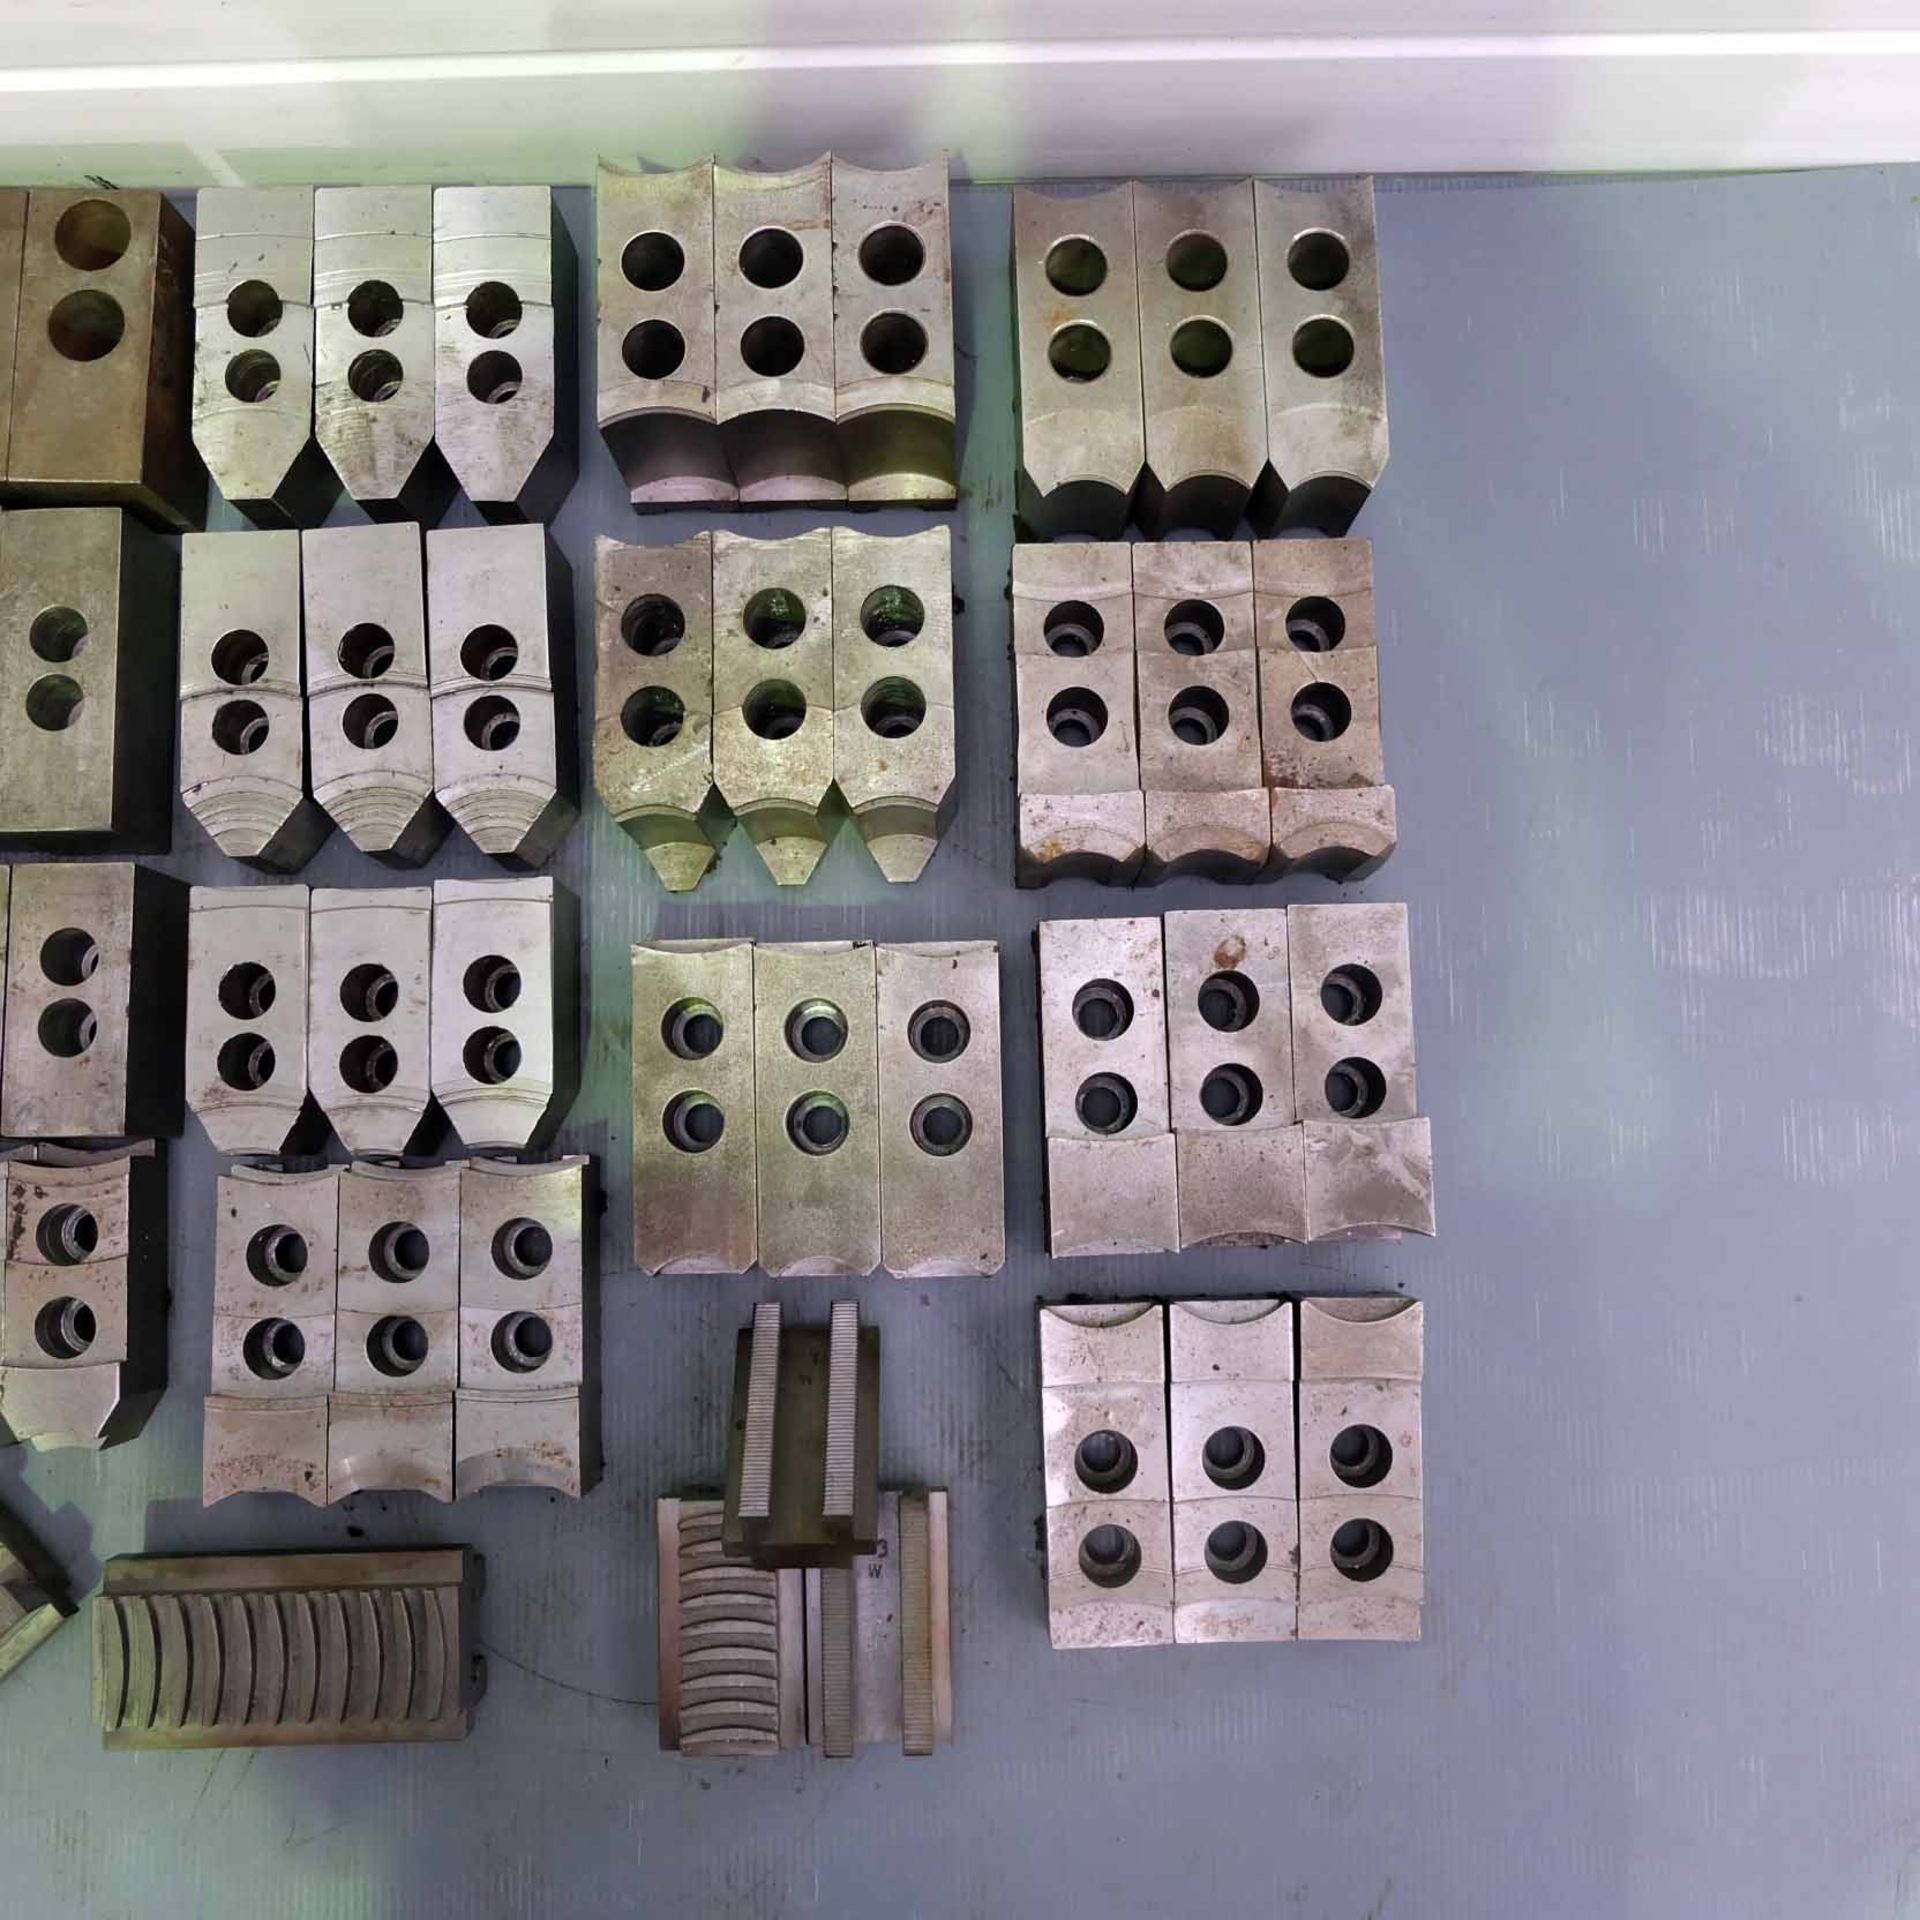 Quantity of Serrated Reverible Top Soft Jaws & 2 Sets of Unused Bottom Jaws. - Image 3 of 5